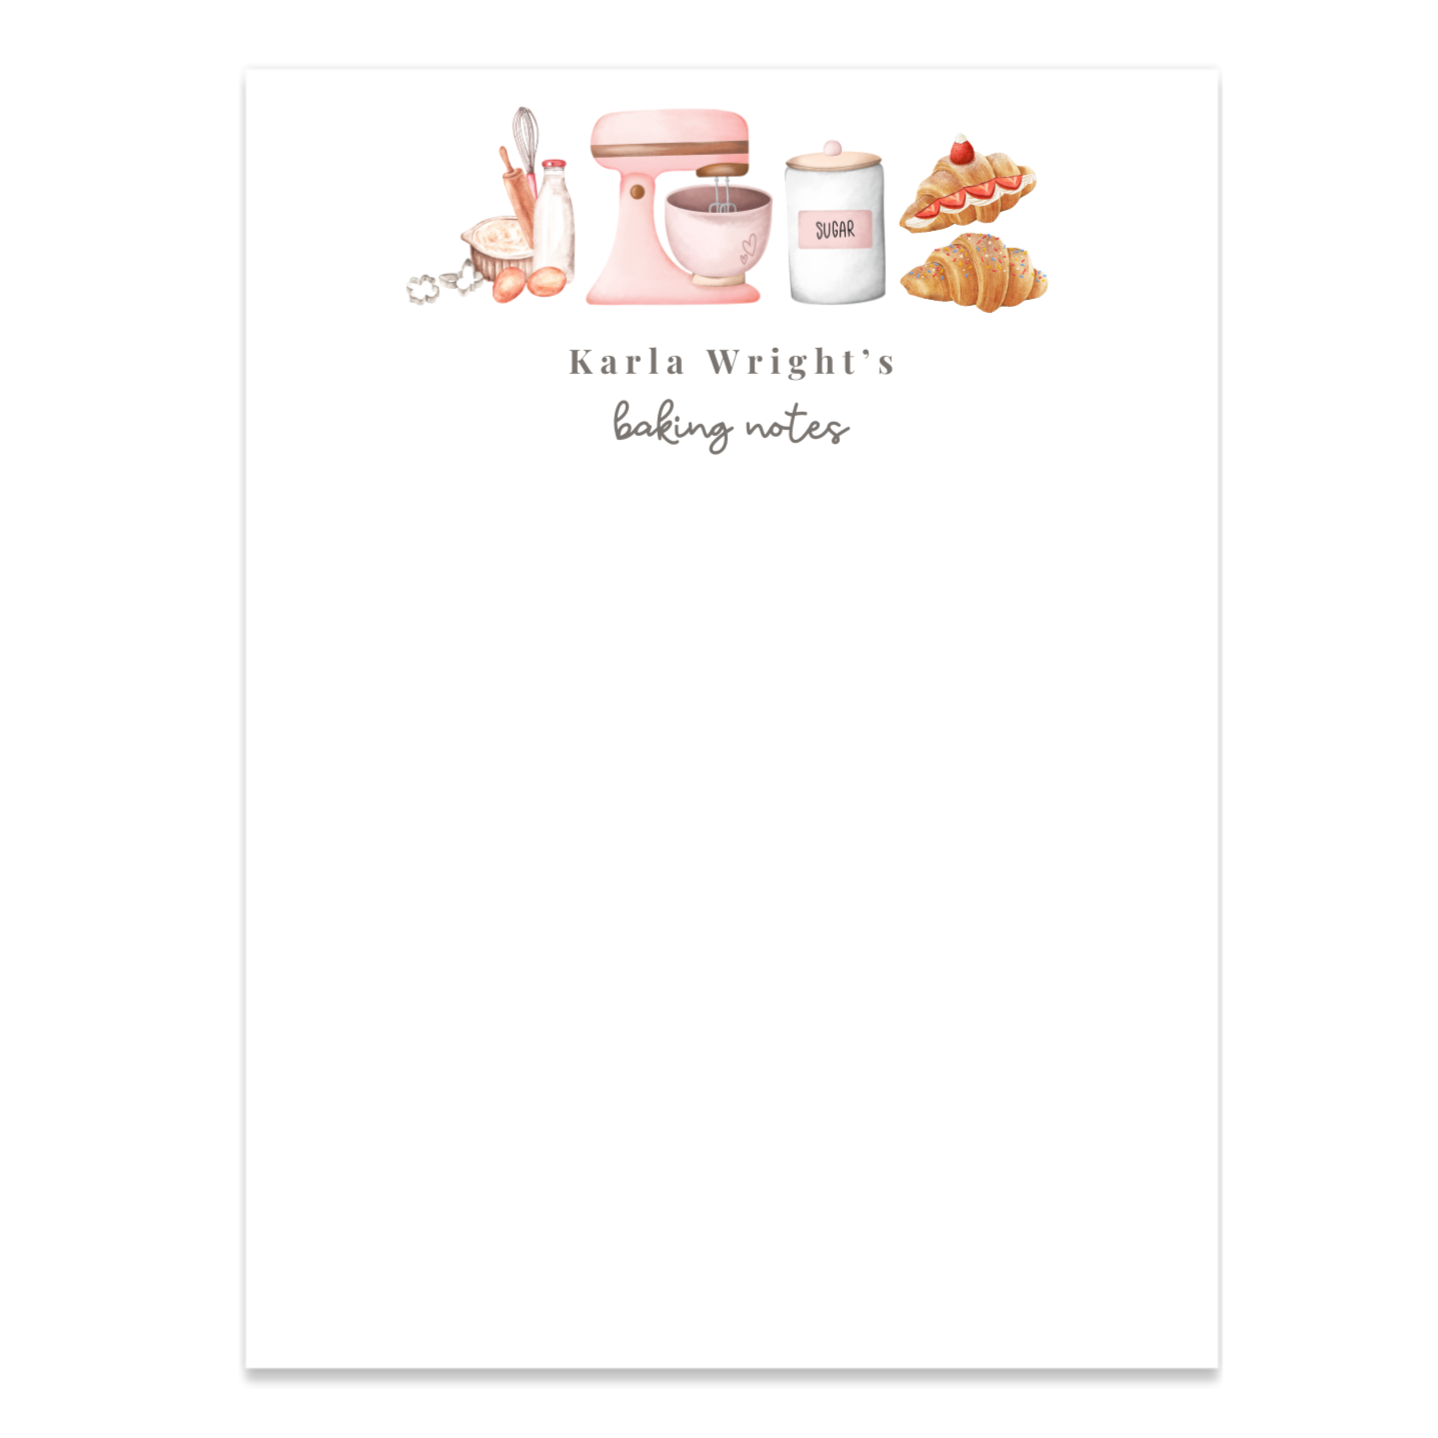 Personalized baker's notepad for the person who loves cooking and baking. Available in two sizes. Wrapped in cellophane ready for gifting! It's going to make their day!